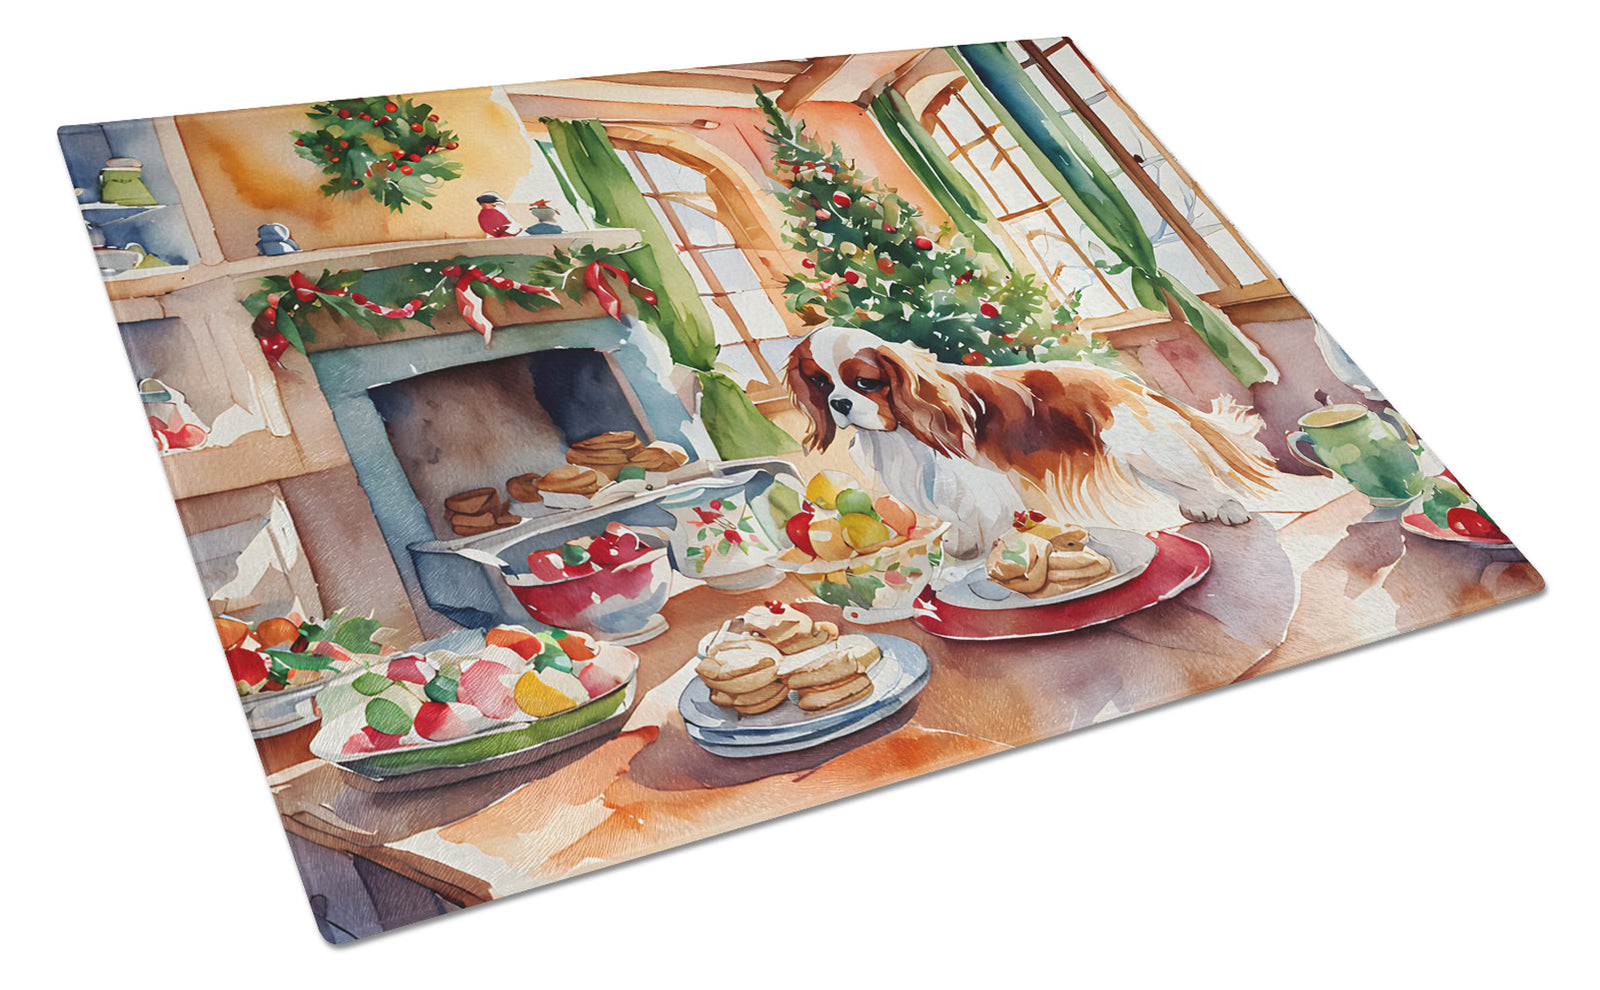 Buy this Cavalier Spaniel Christmas Cookies Glass Cutting Board